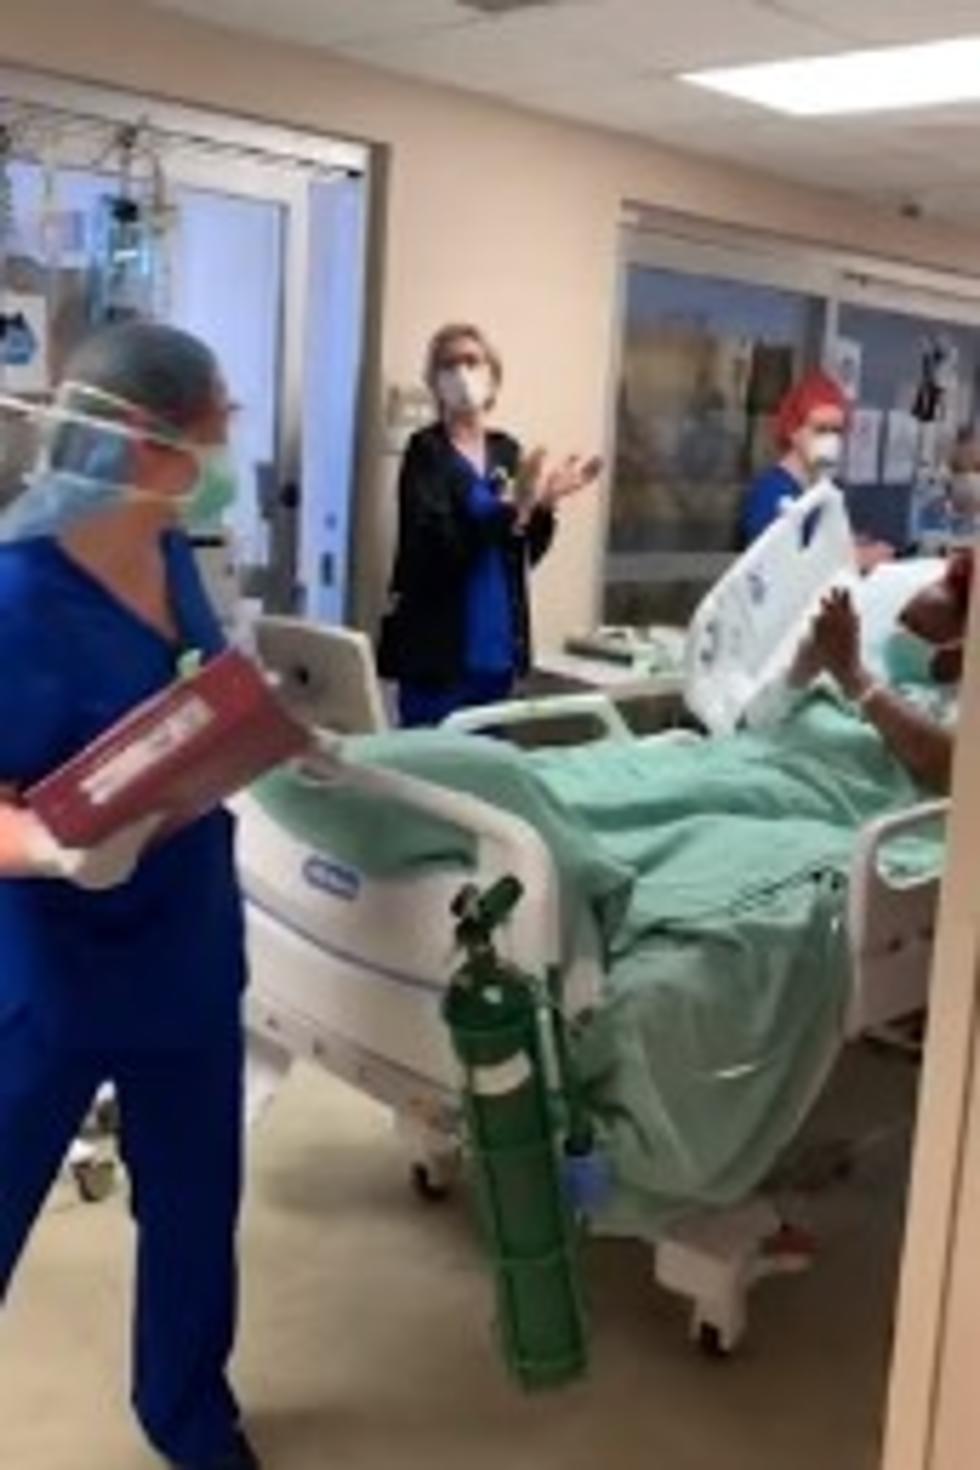 Watch As Staff at WK Celebrate One Patient’s Recovery